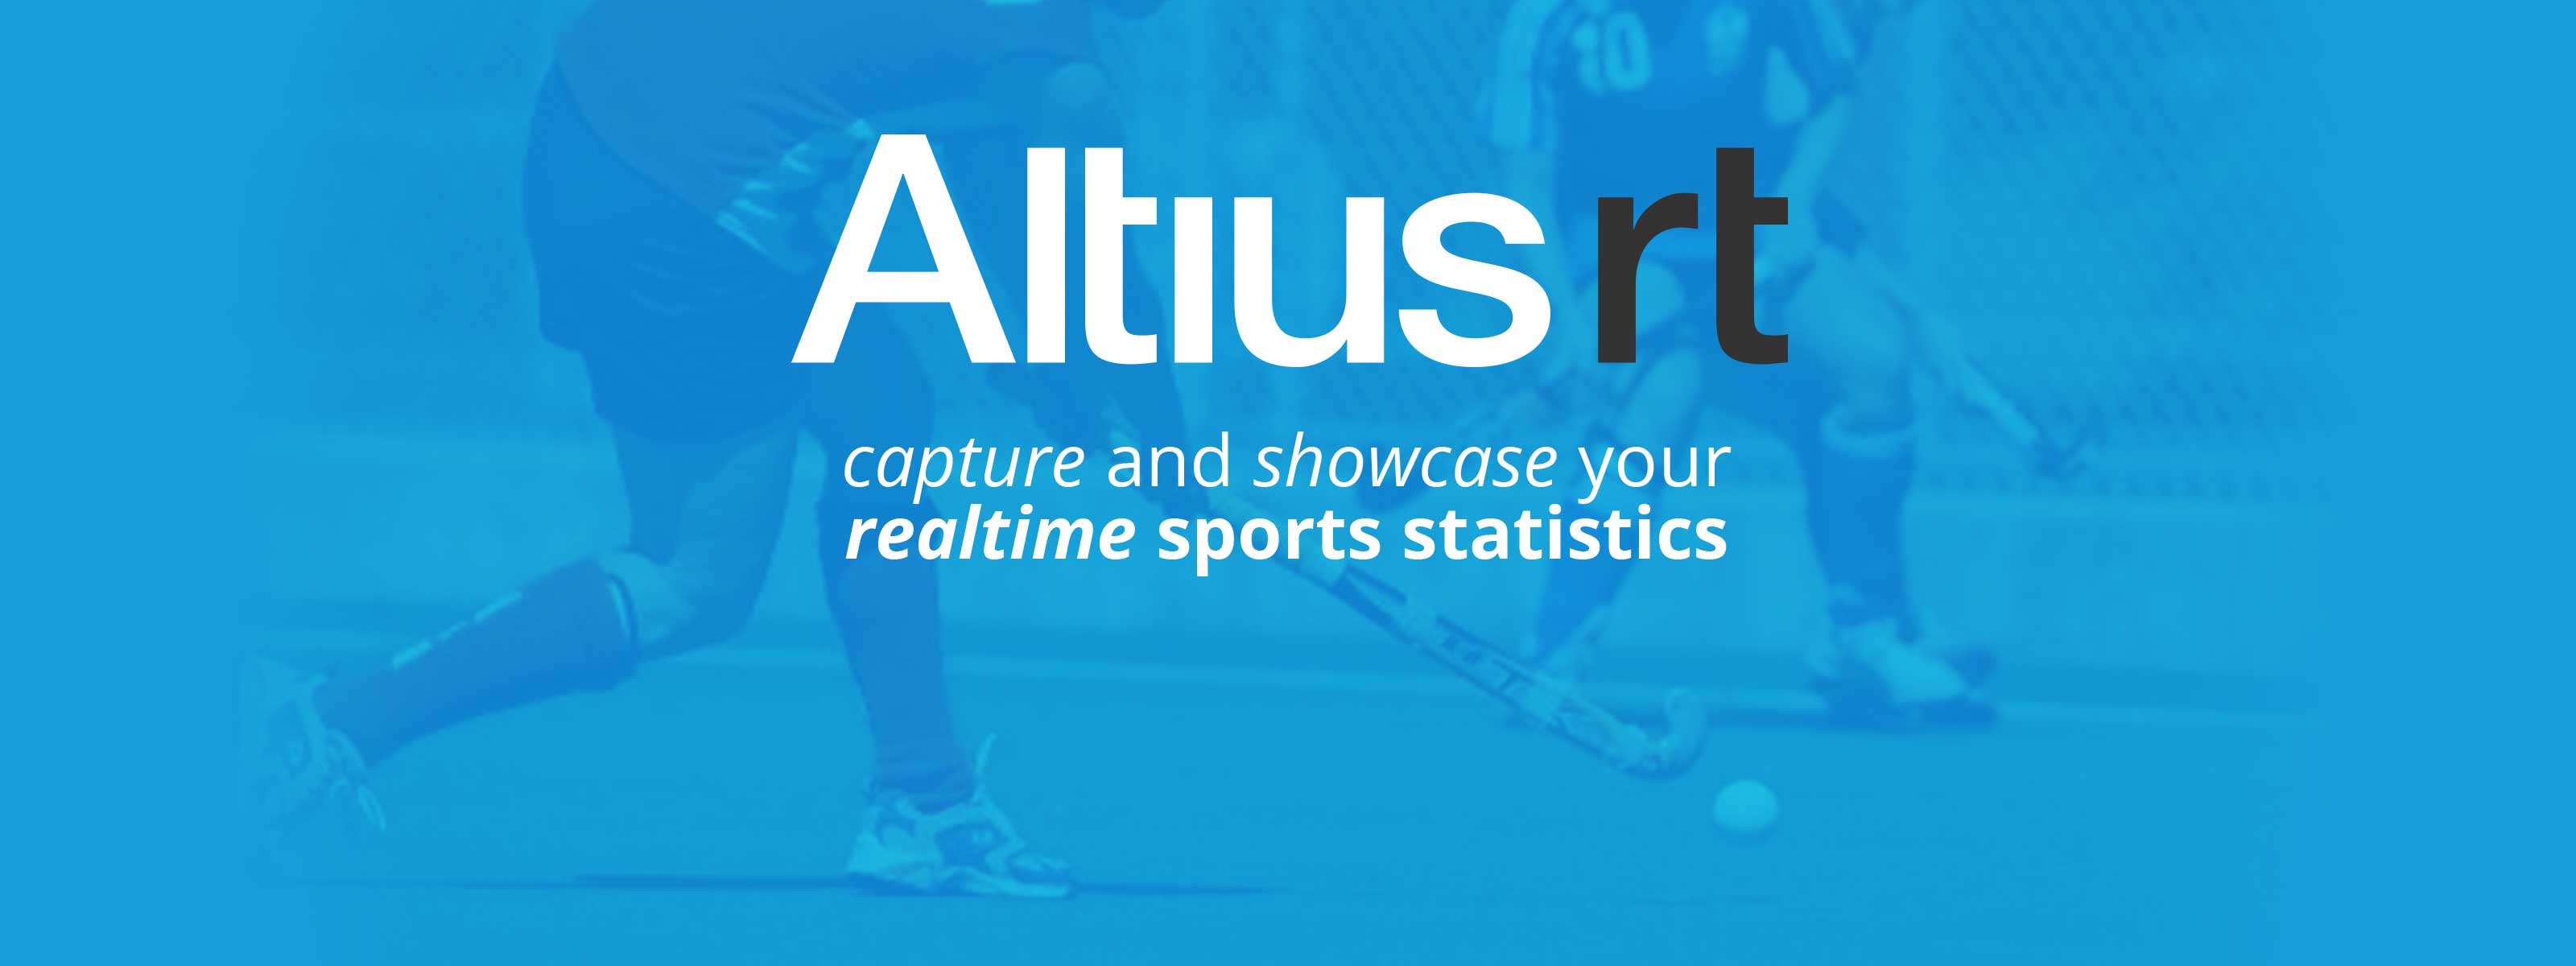 capture and showcase your realtime sports statistics